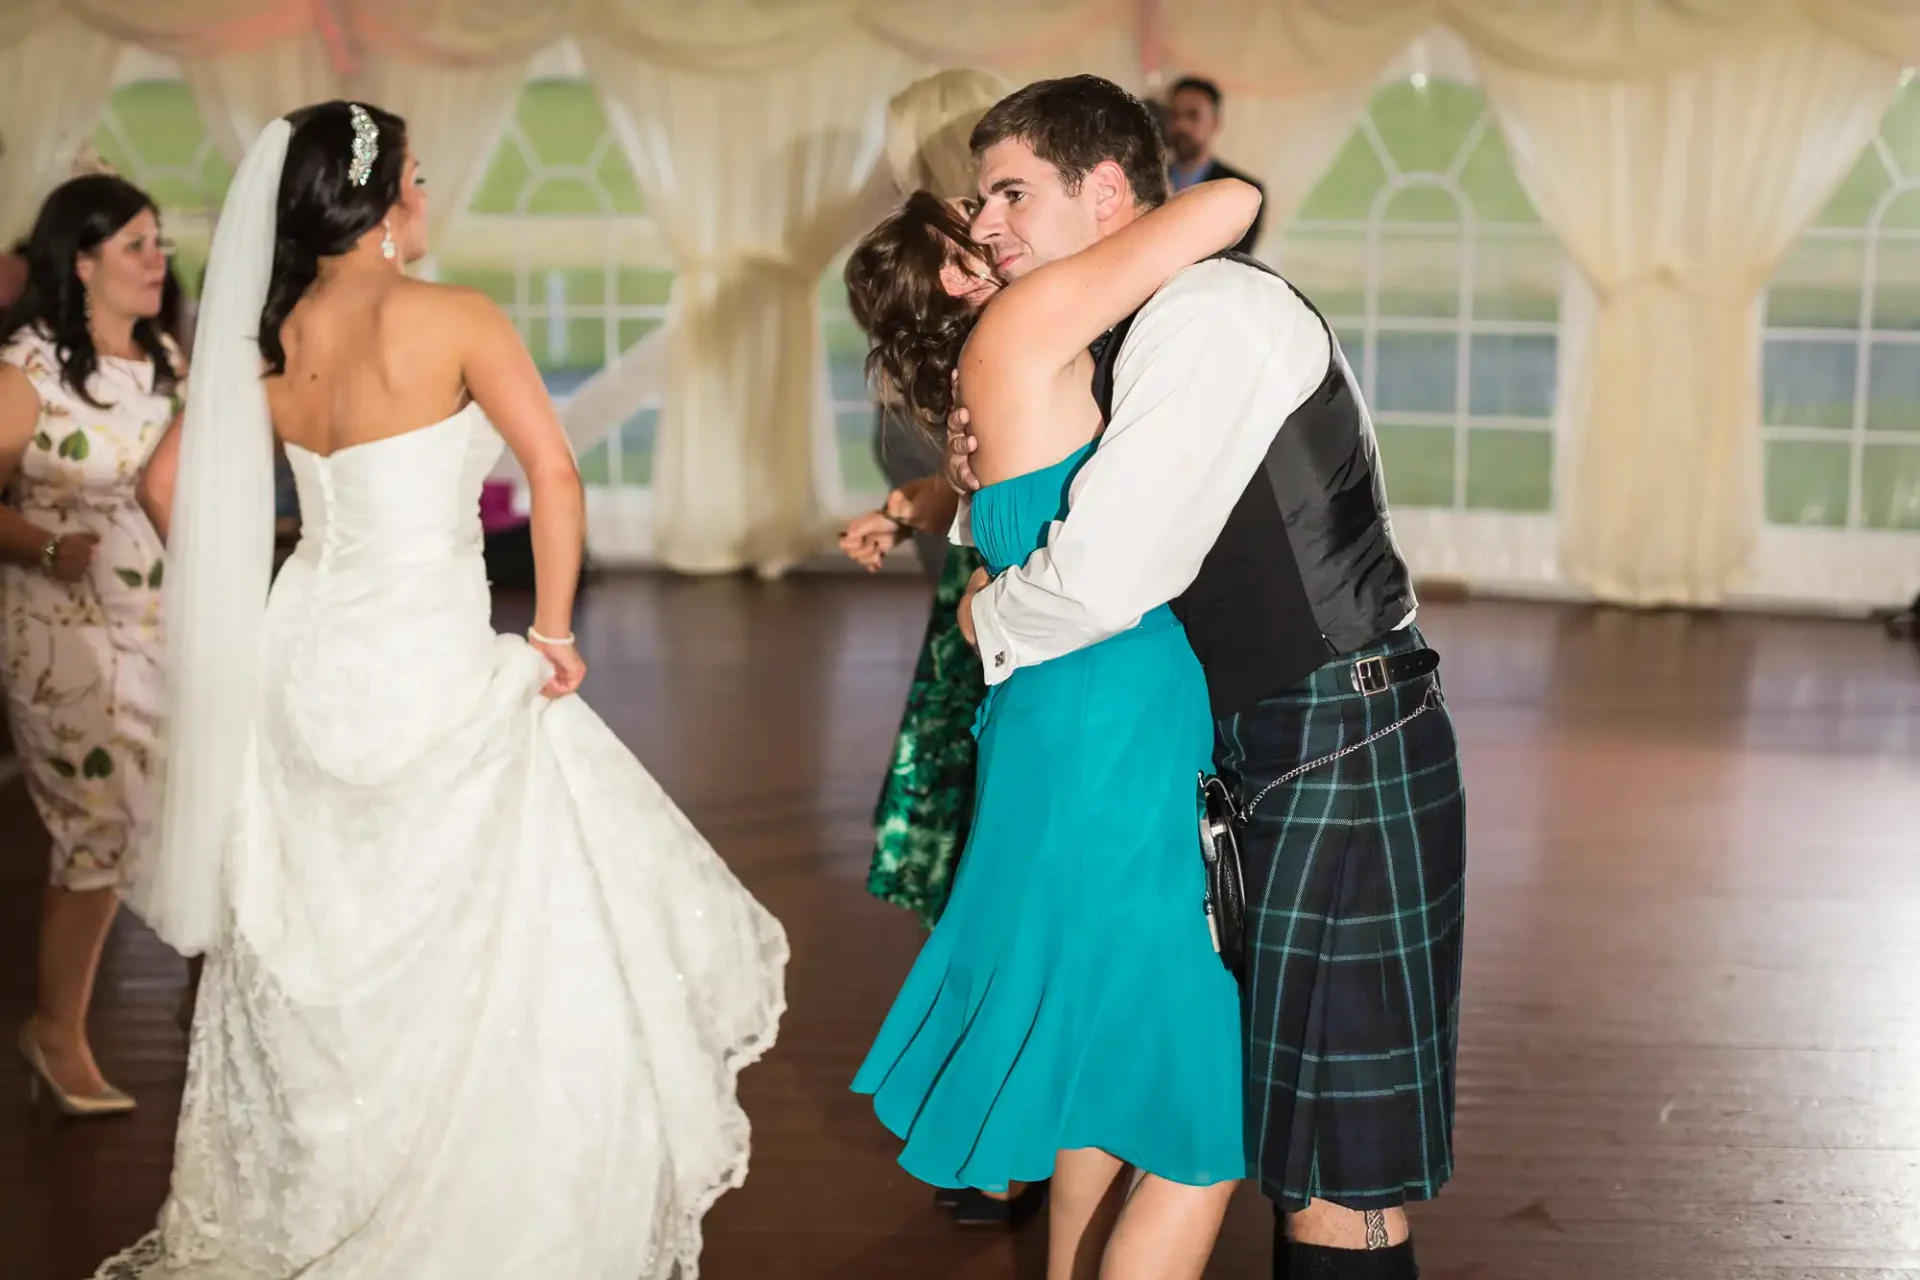 A bride in a white dress and a man in a kilt embracing on the dance floor at a wedding reception, with guests in the background.